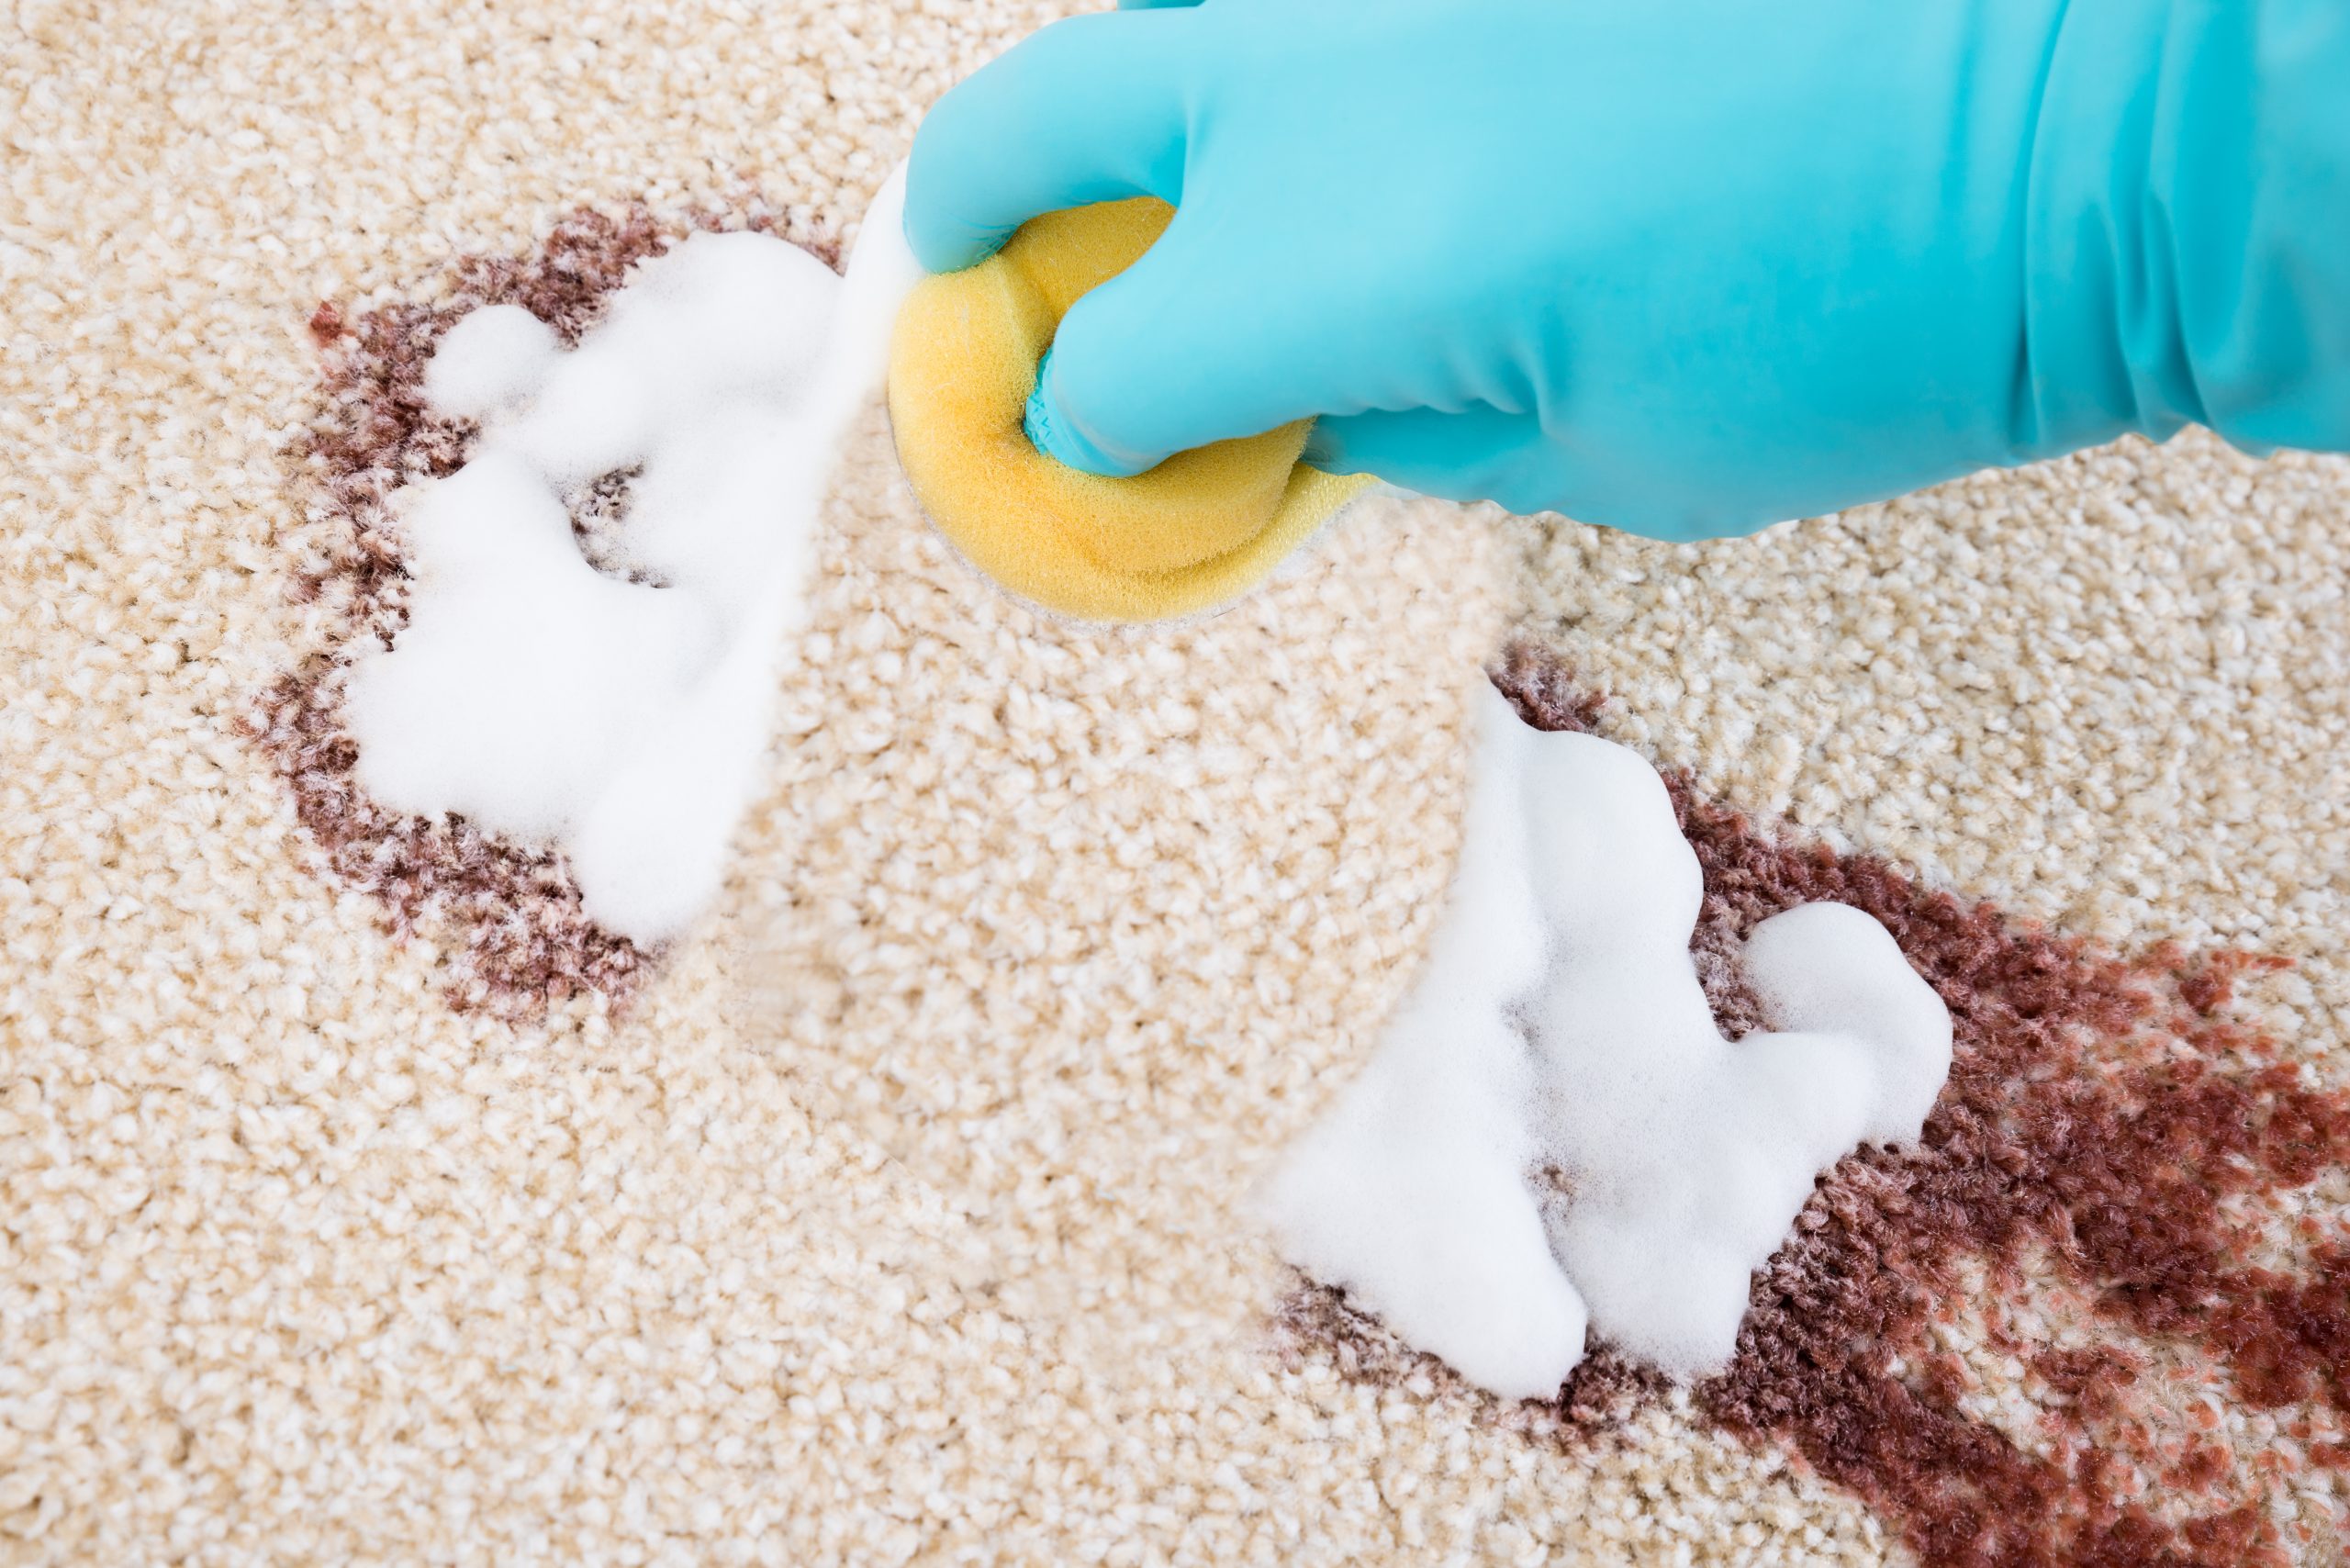 Professional Stain Removal Experts on Carpets and Rugs in Australia.